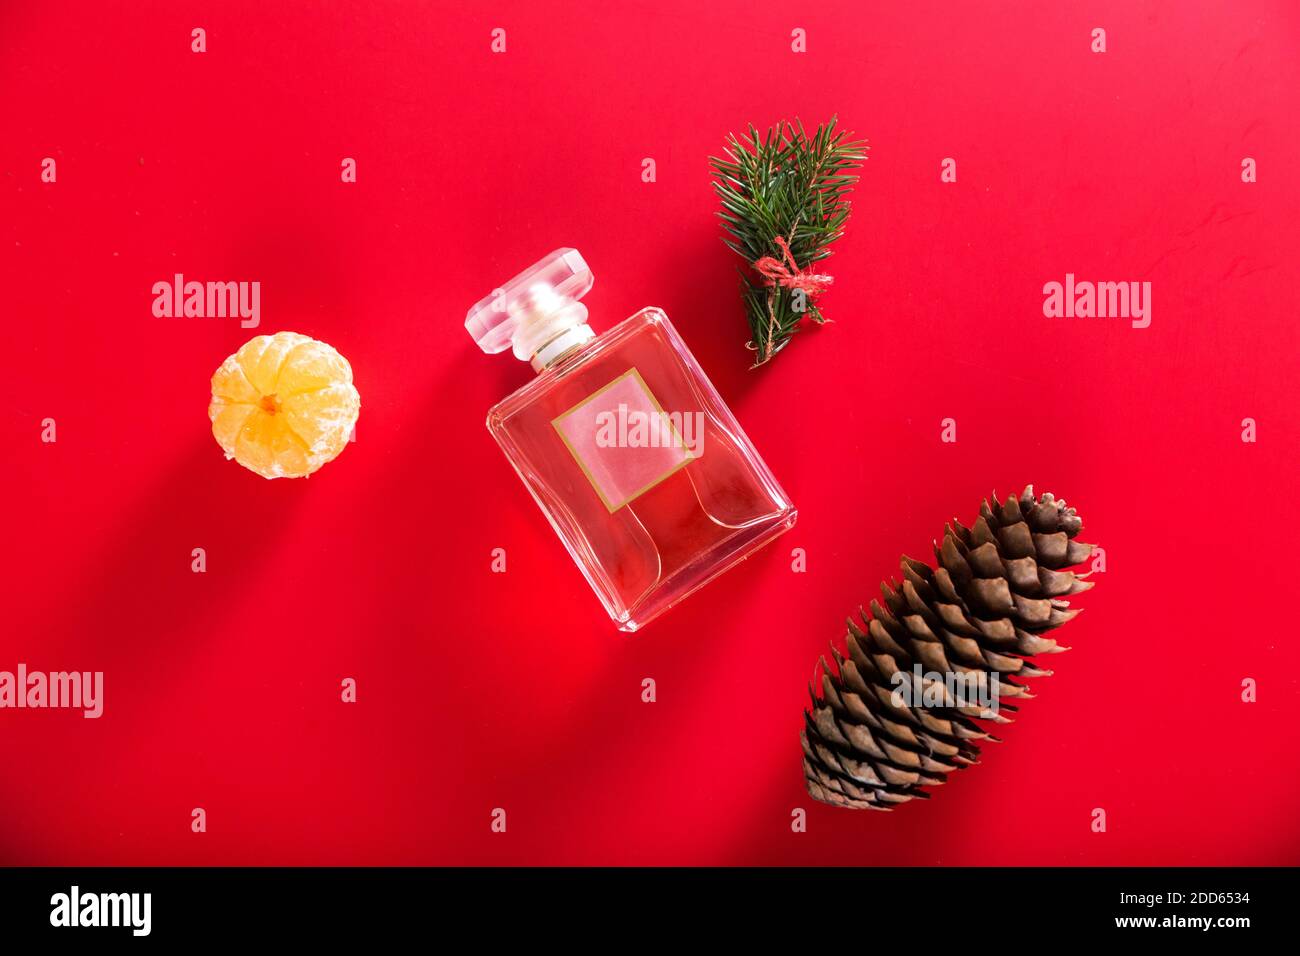 A bottle of perfume among the decor of Christmas tree branches, tangerine and cones on a red background Stock Photo